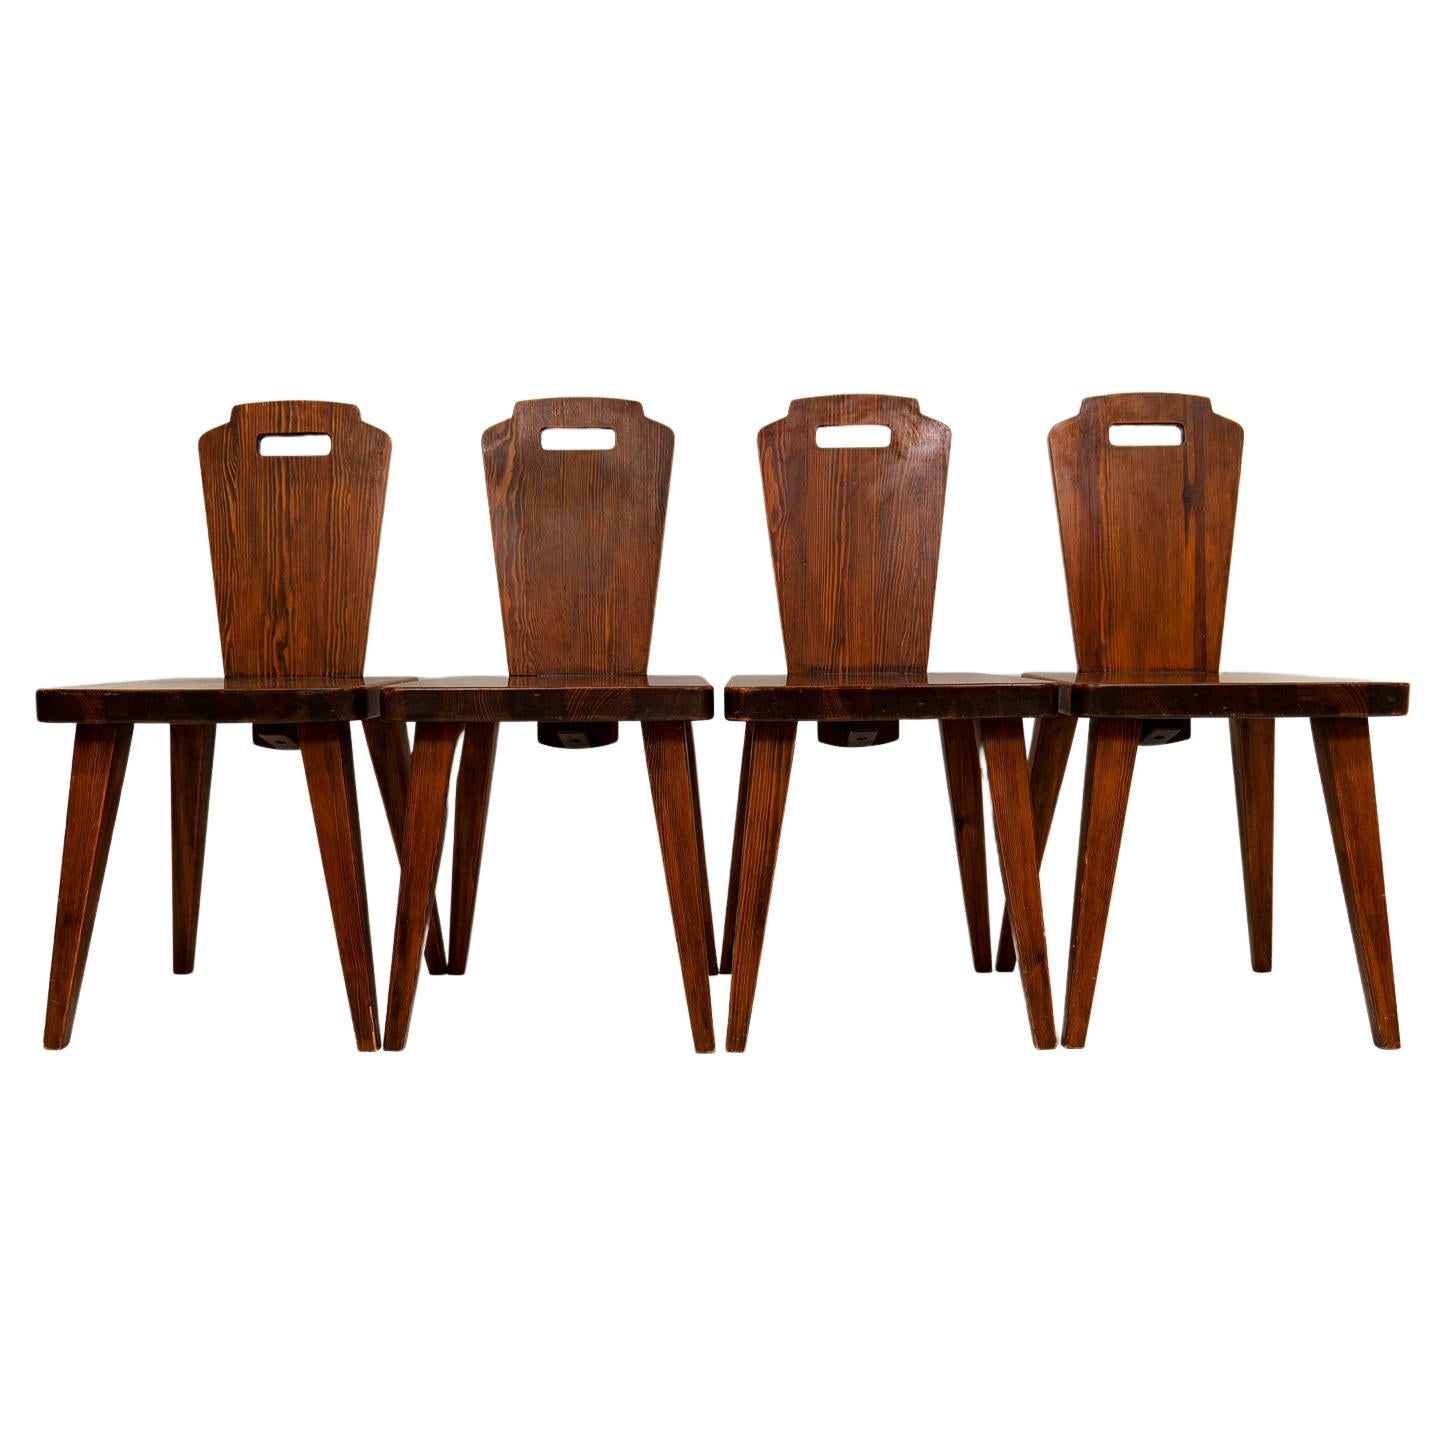 Swedish Modern Dining Chairs in Pine Attributed to Bo Fjaestad, 1940s For Sale